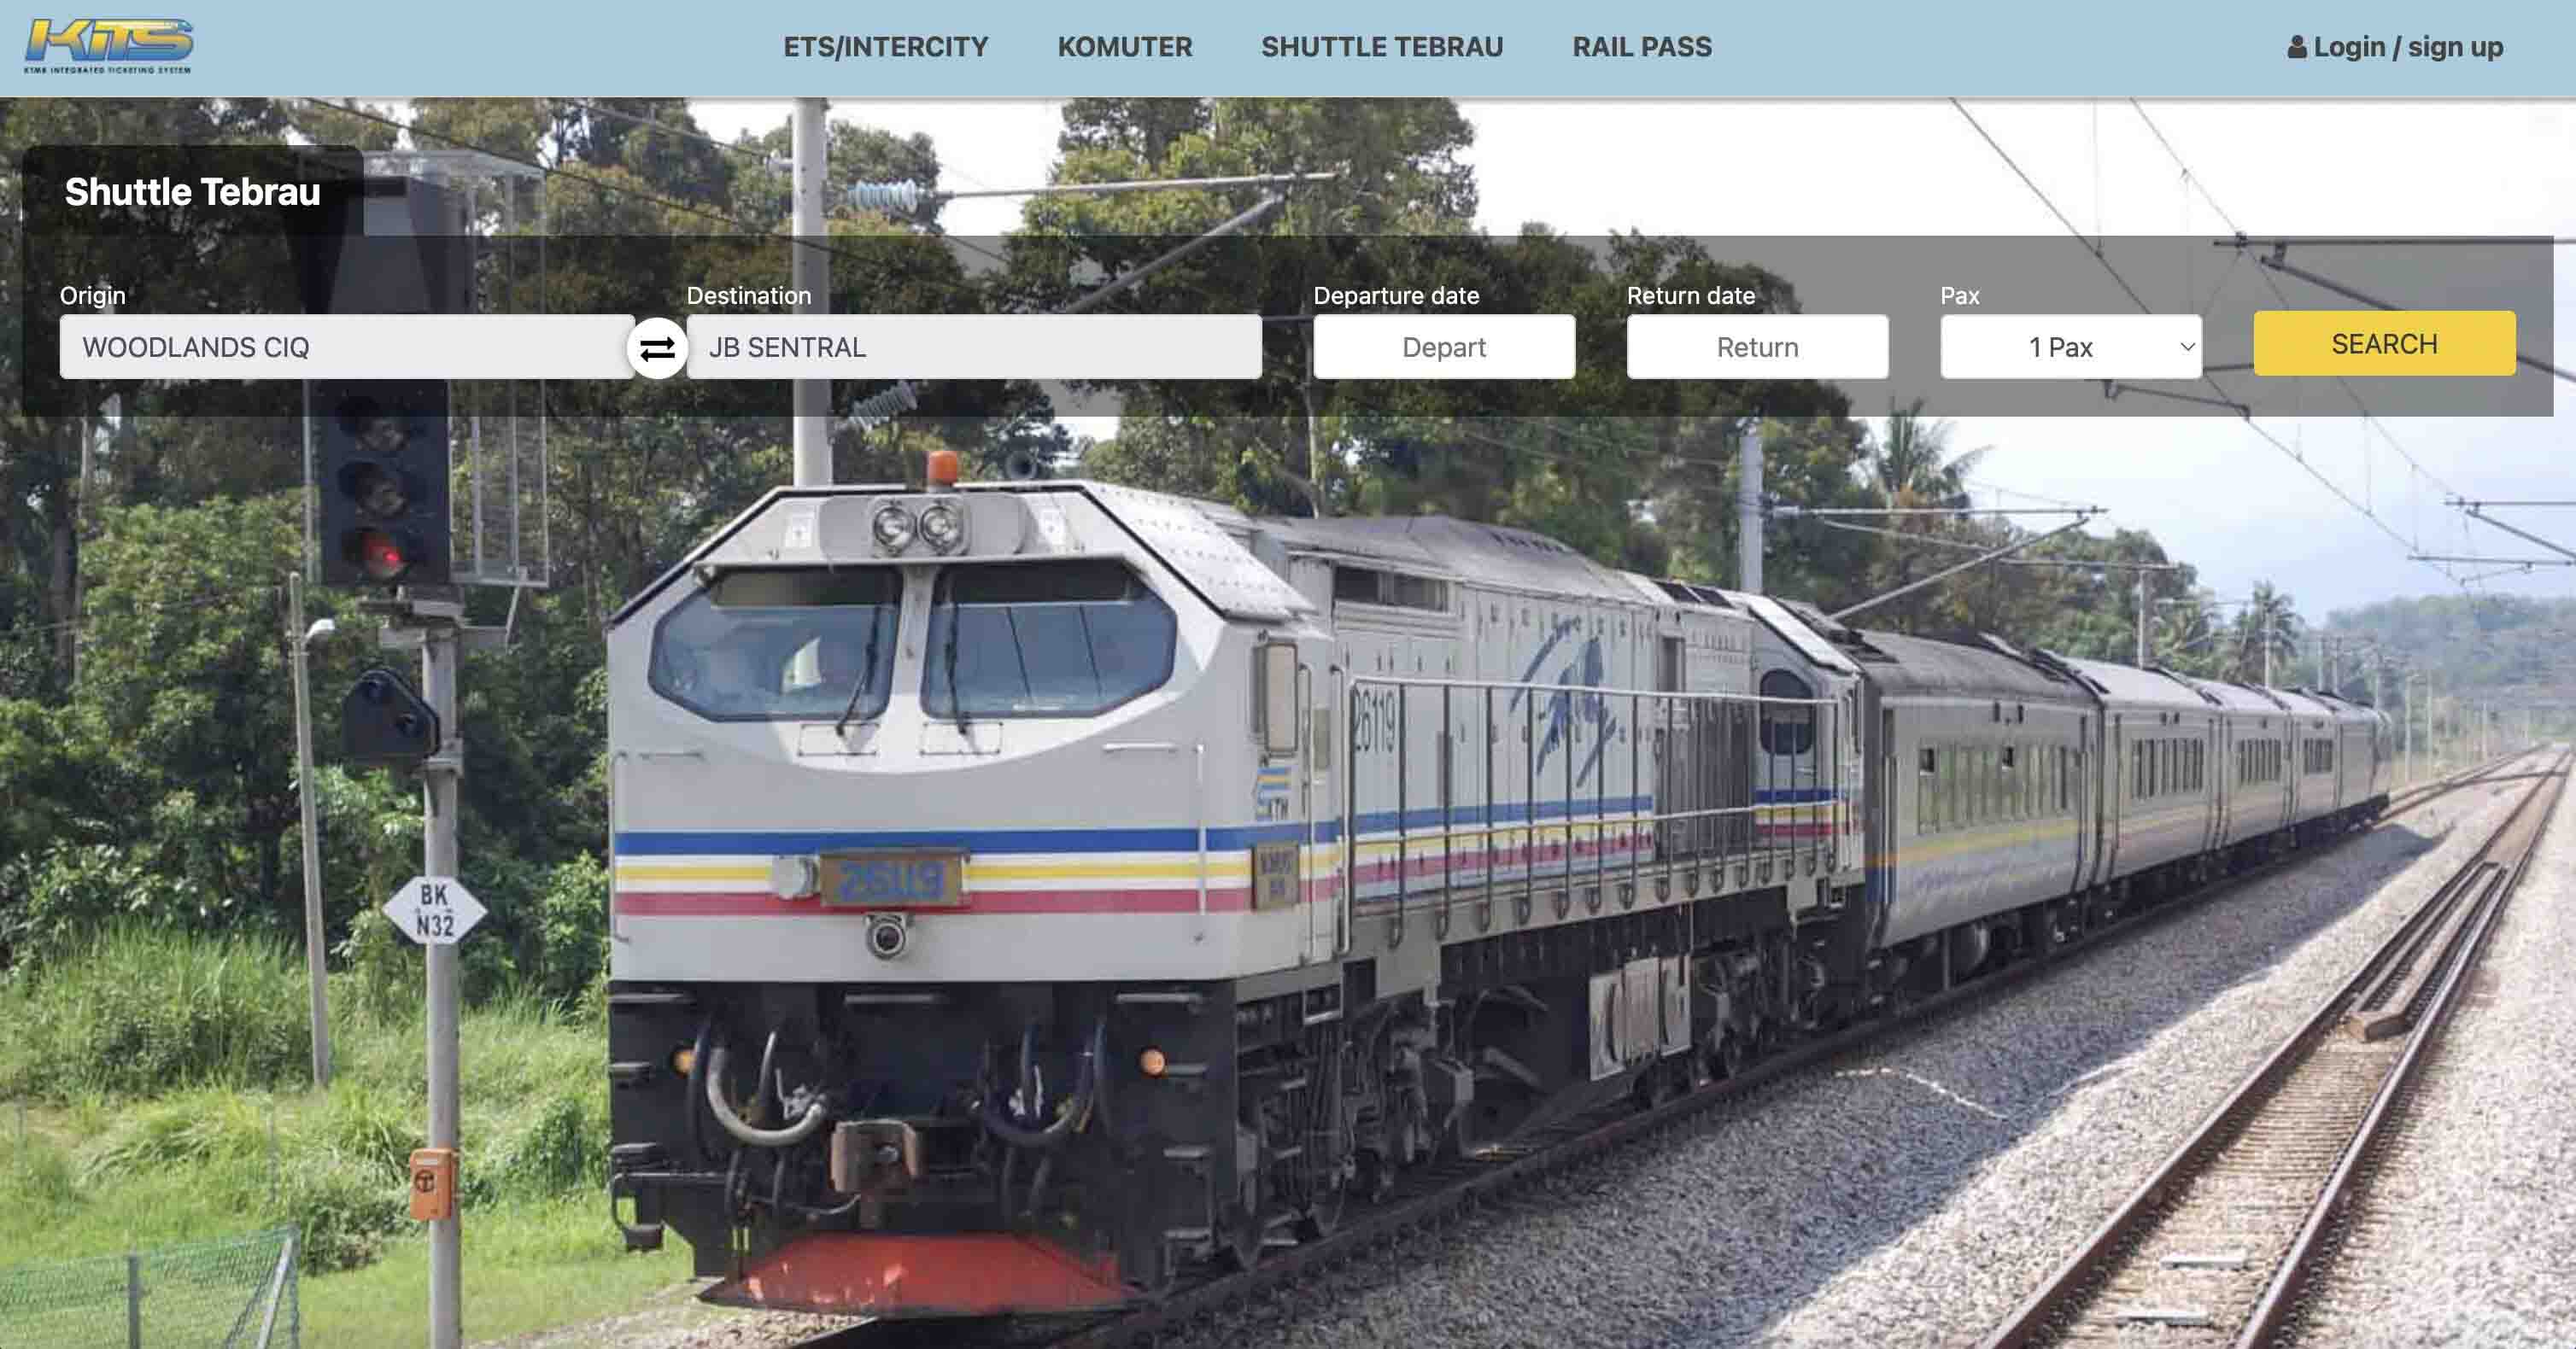 KTM train ticket home page - train from Singapore to JB